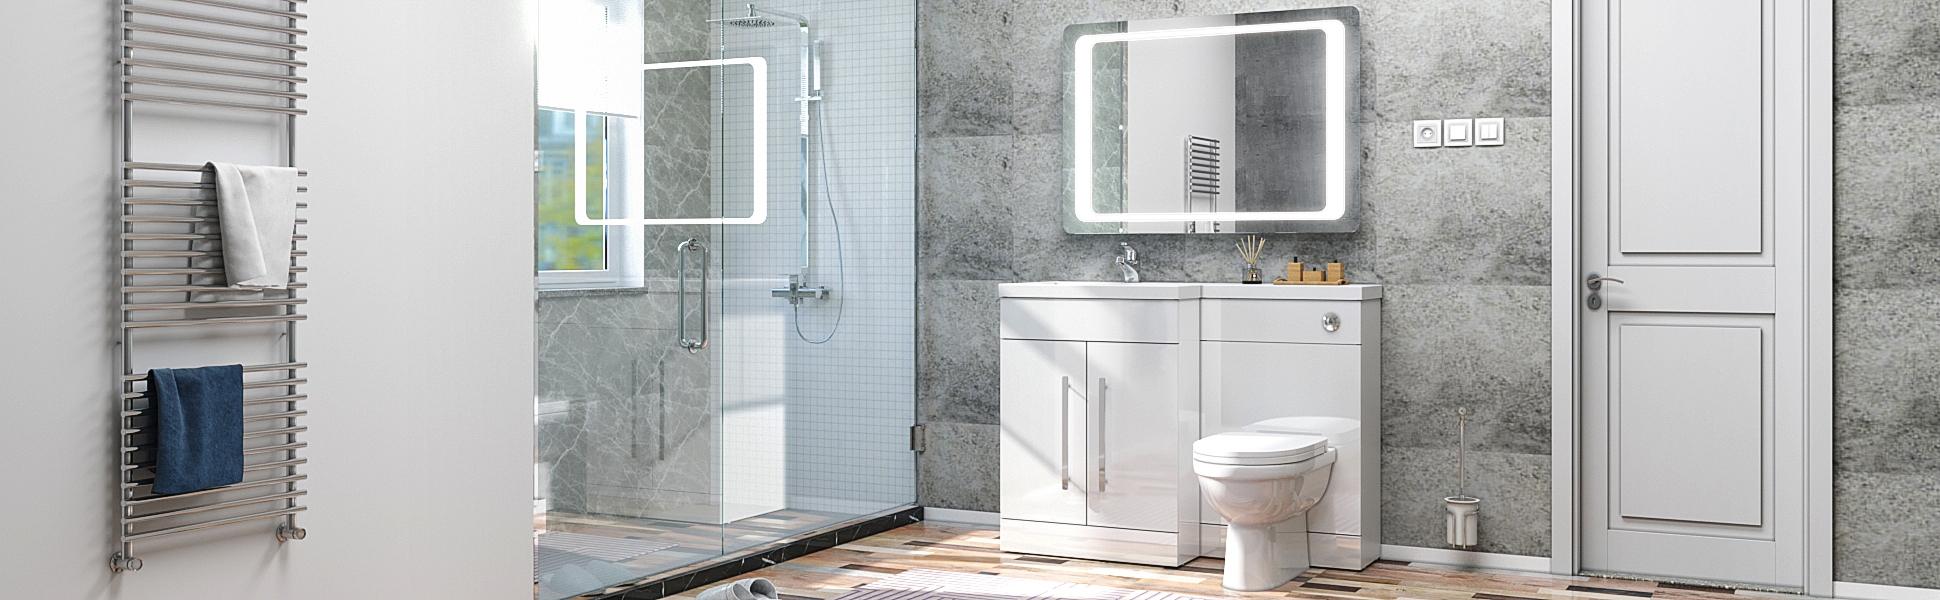 Buy Toilet and Sink Unit Online: A Convenient Solution for Your Bathroom